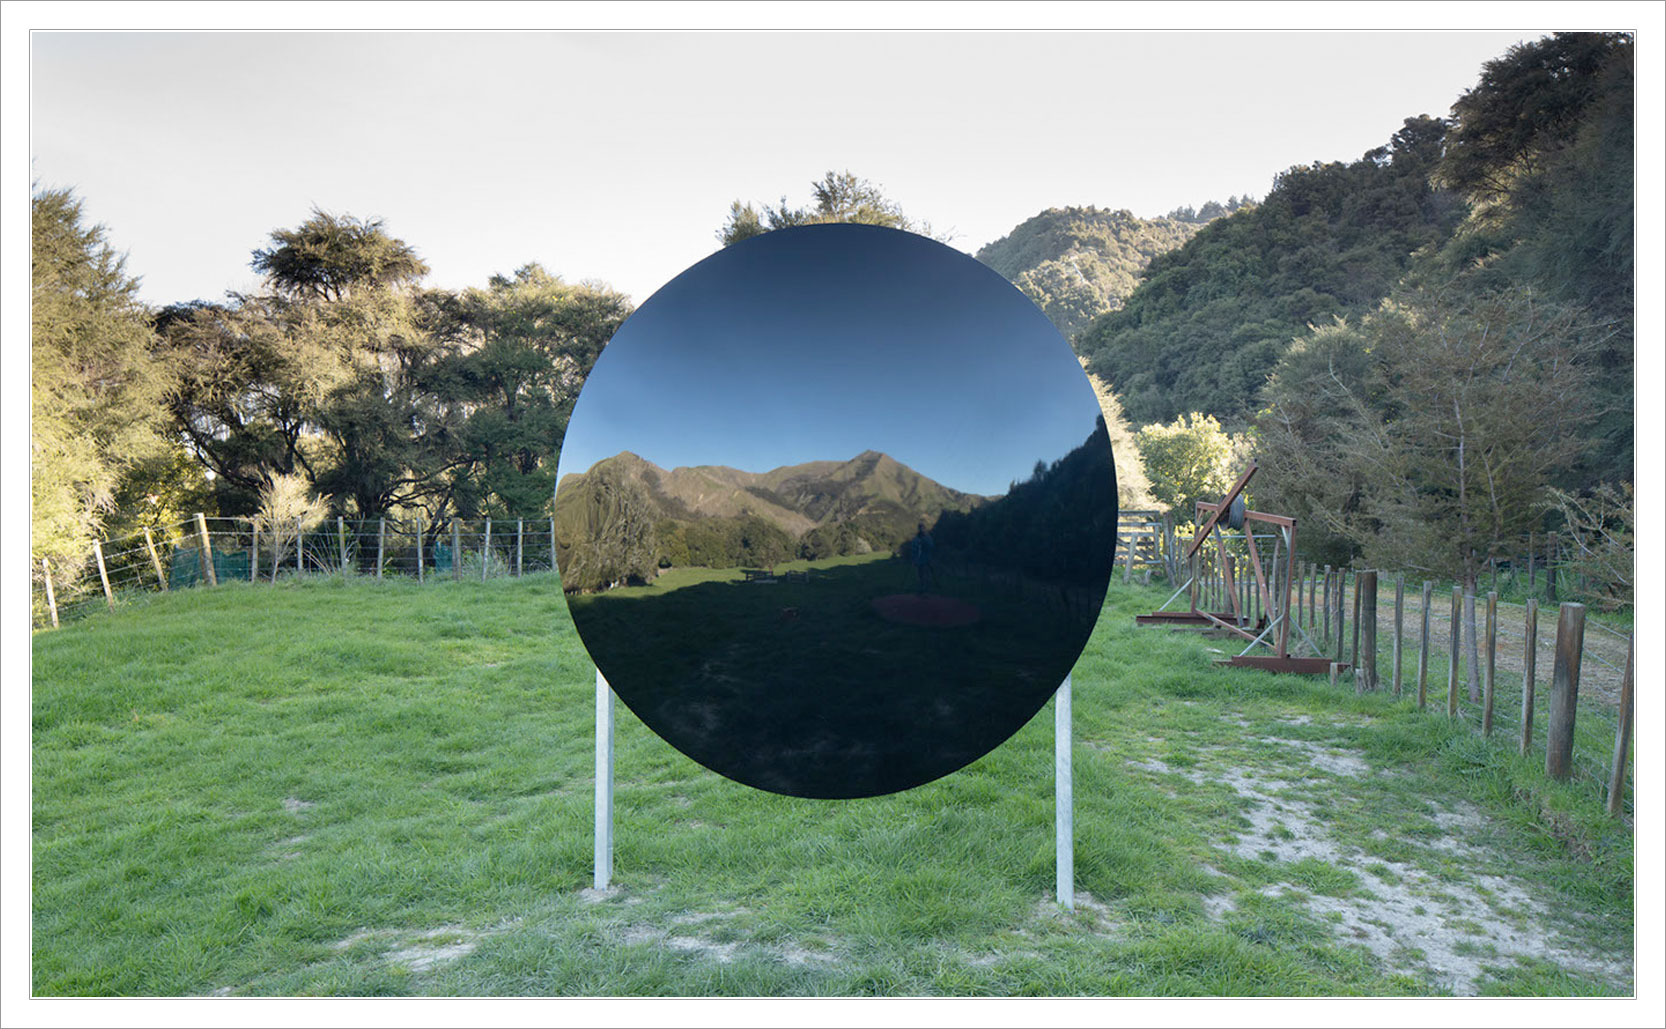 a large Claude glass installed at the Waikereru Ecosanctuary in New Zealand